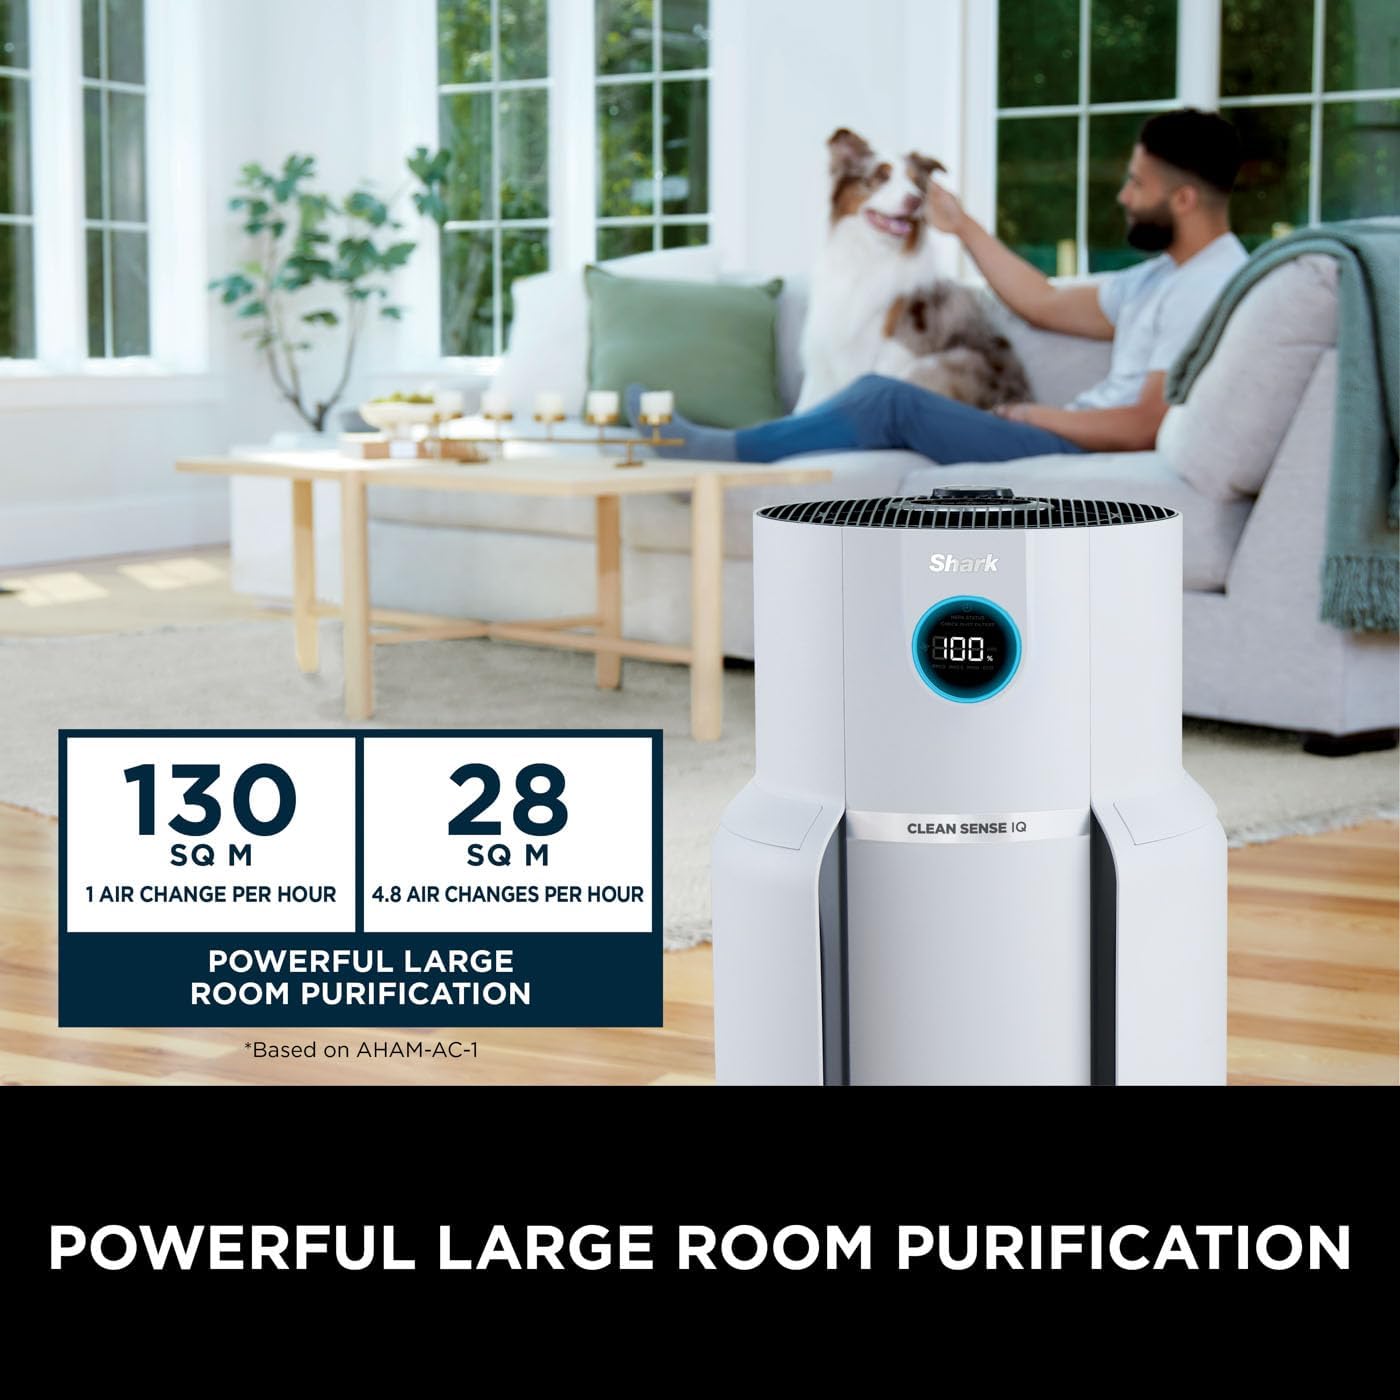 Shark NeverChange5 Air Purifier MAX for Home, Large Room Coverage 130sqm, 5 - Year HEPA Filter Traps 99.97% of Allergens including Dust, Pollen, Pet Dander, Auto Mode, Quiet, LED Display, White HP300UK - Amazing Gadgets Outlet